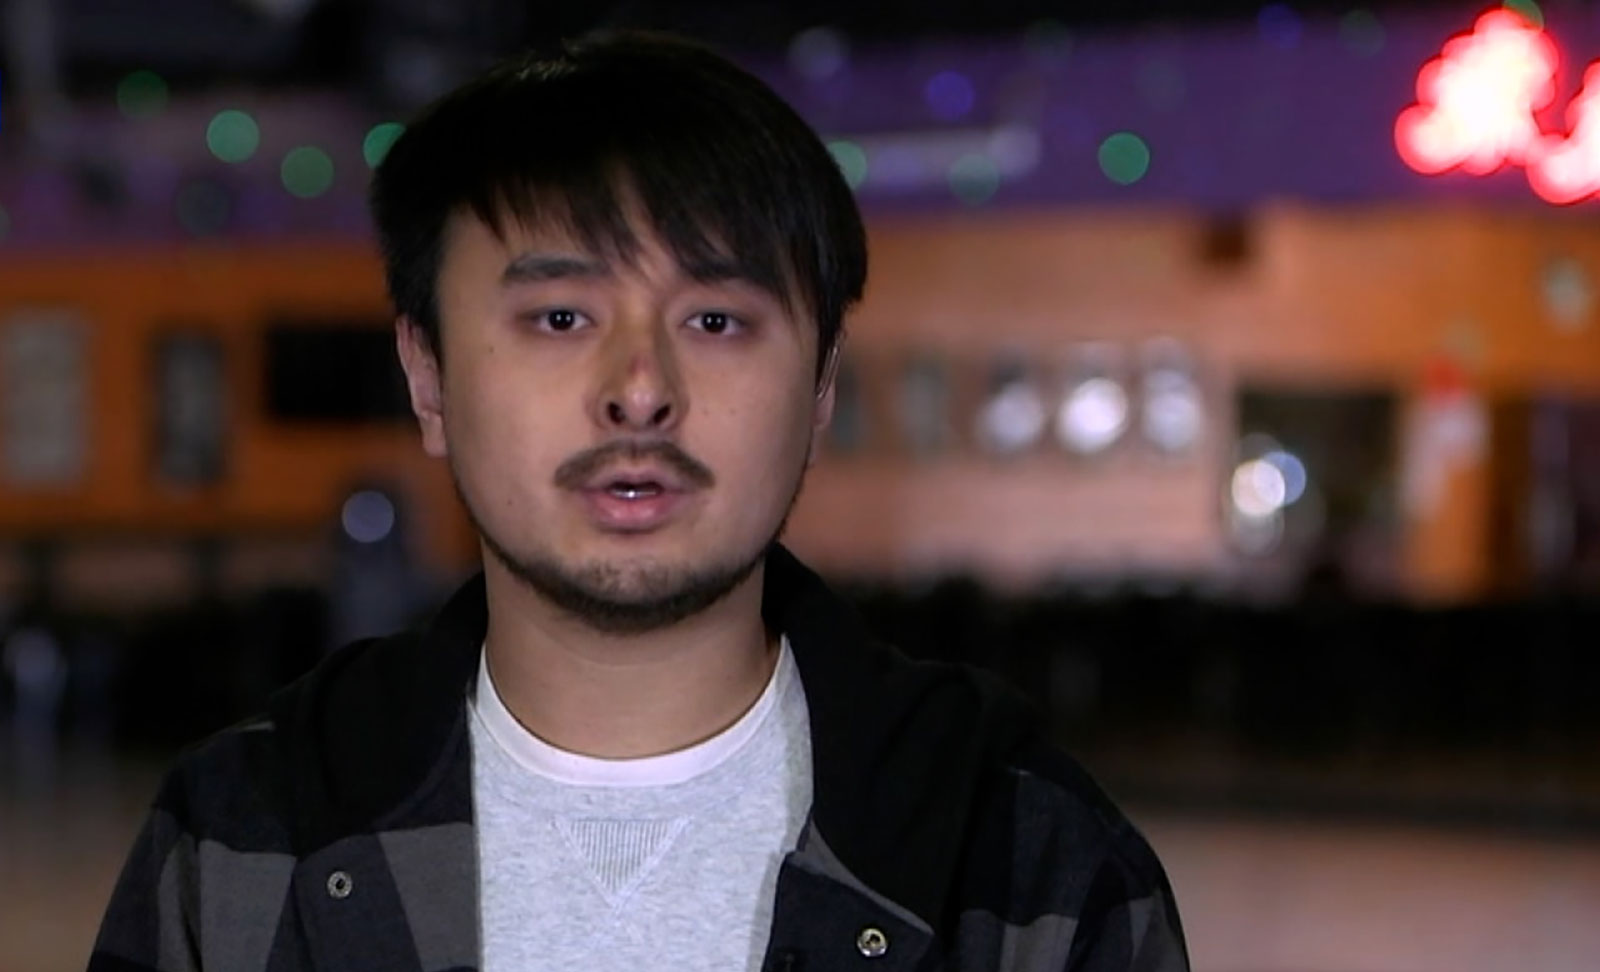 Brandon Tsay speaks about his encounter with the suspect at the Alhambra dance hall. 